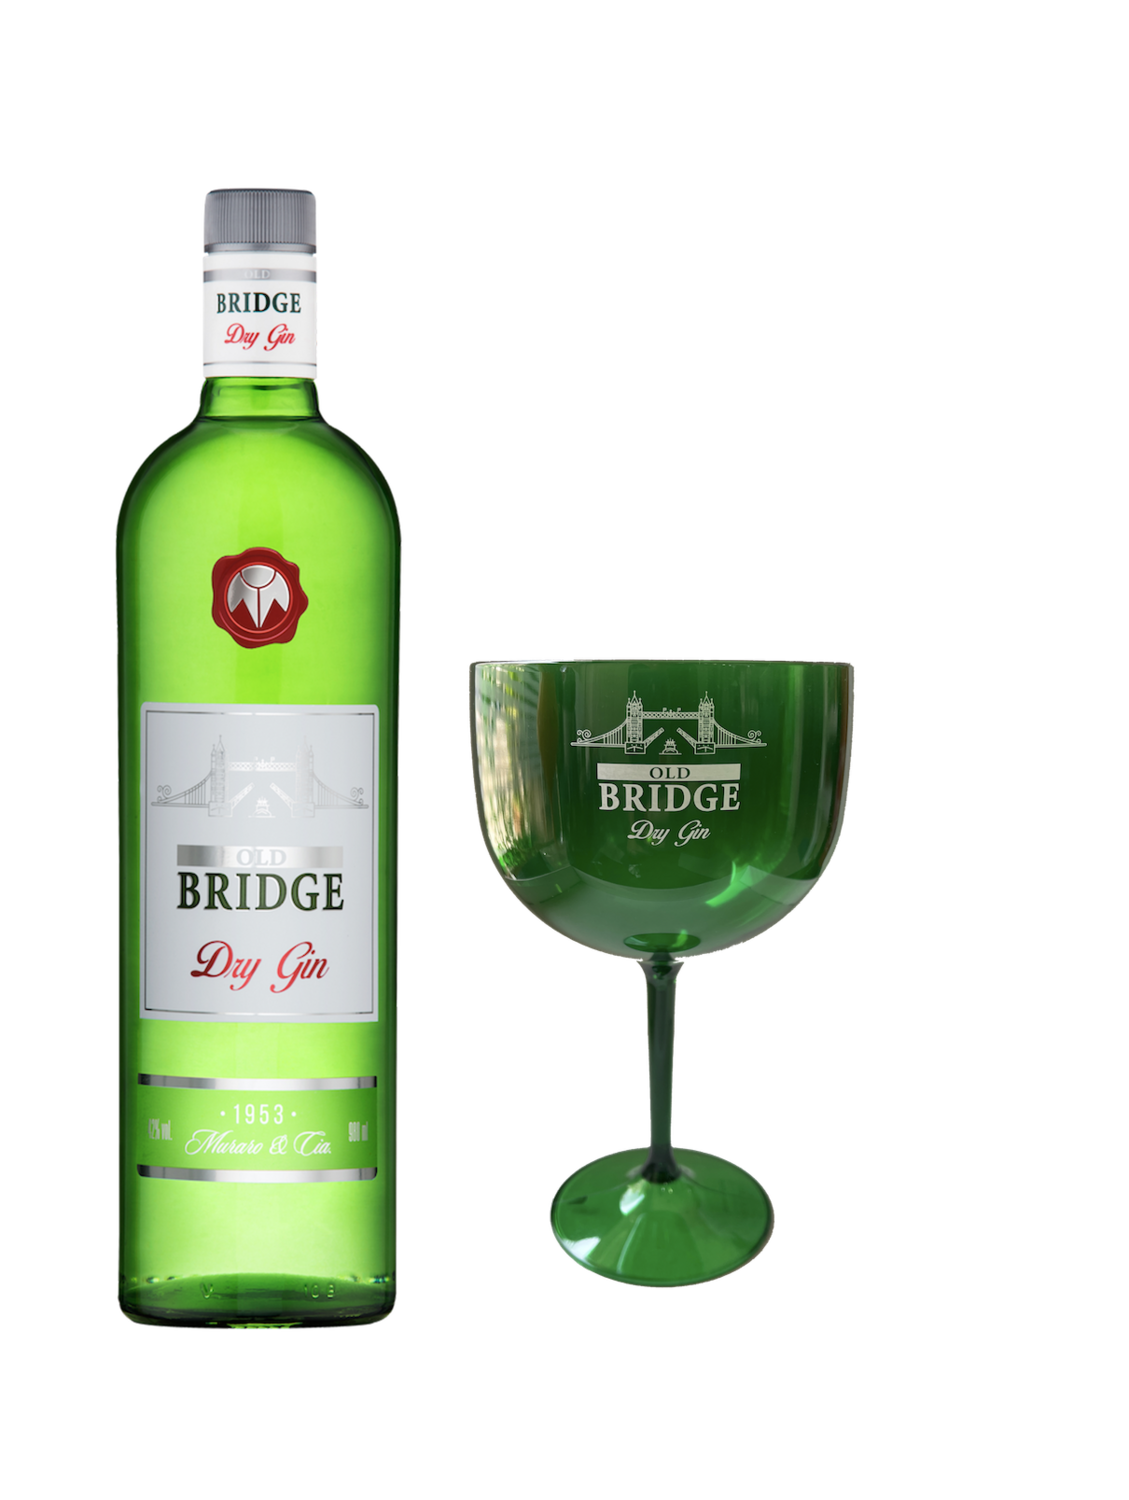 OLD BRIDGE GIN 6*98 CL + Special Gin Tonic Cup